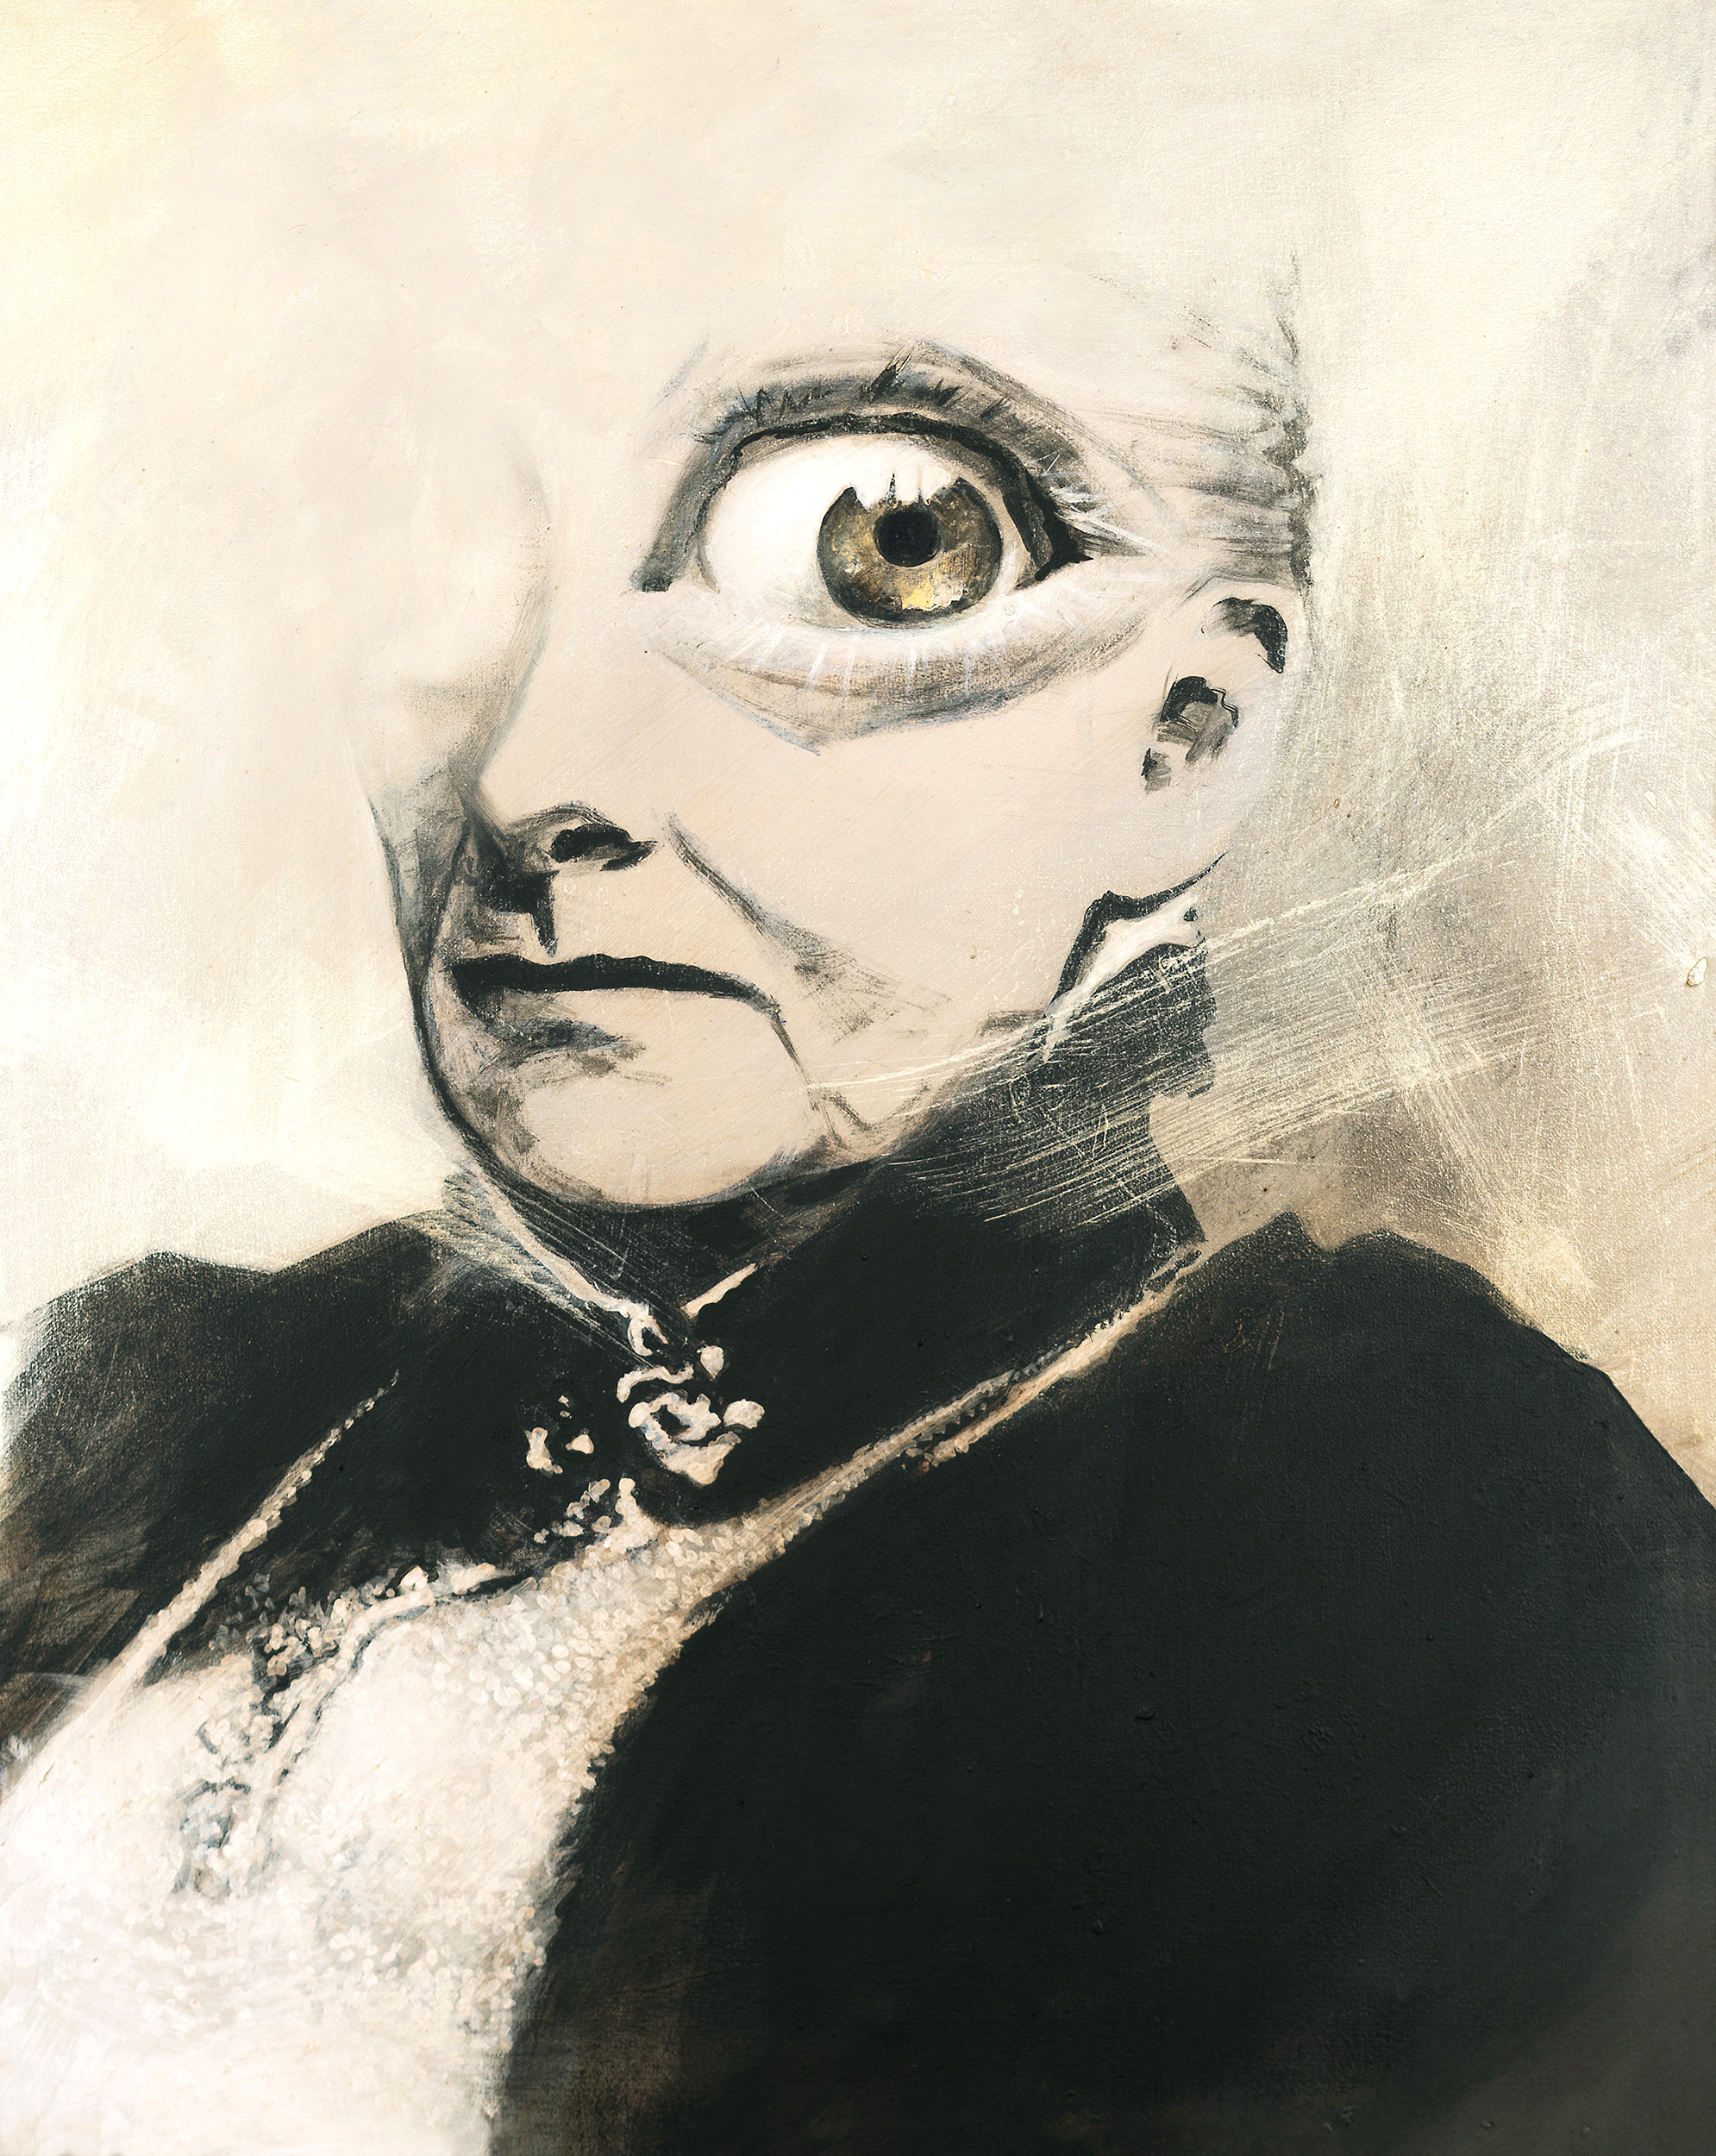 Portrait of a Victorian lady in sepia tones with a huge eye and a serious face.